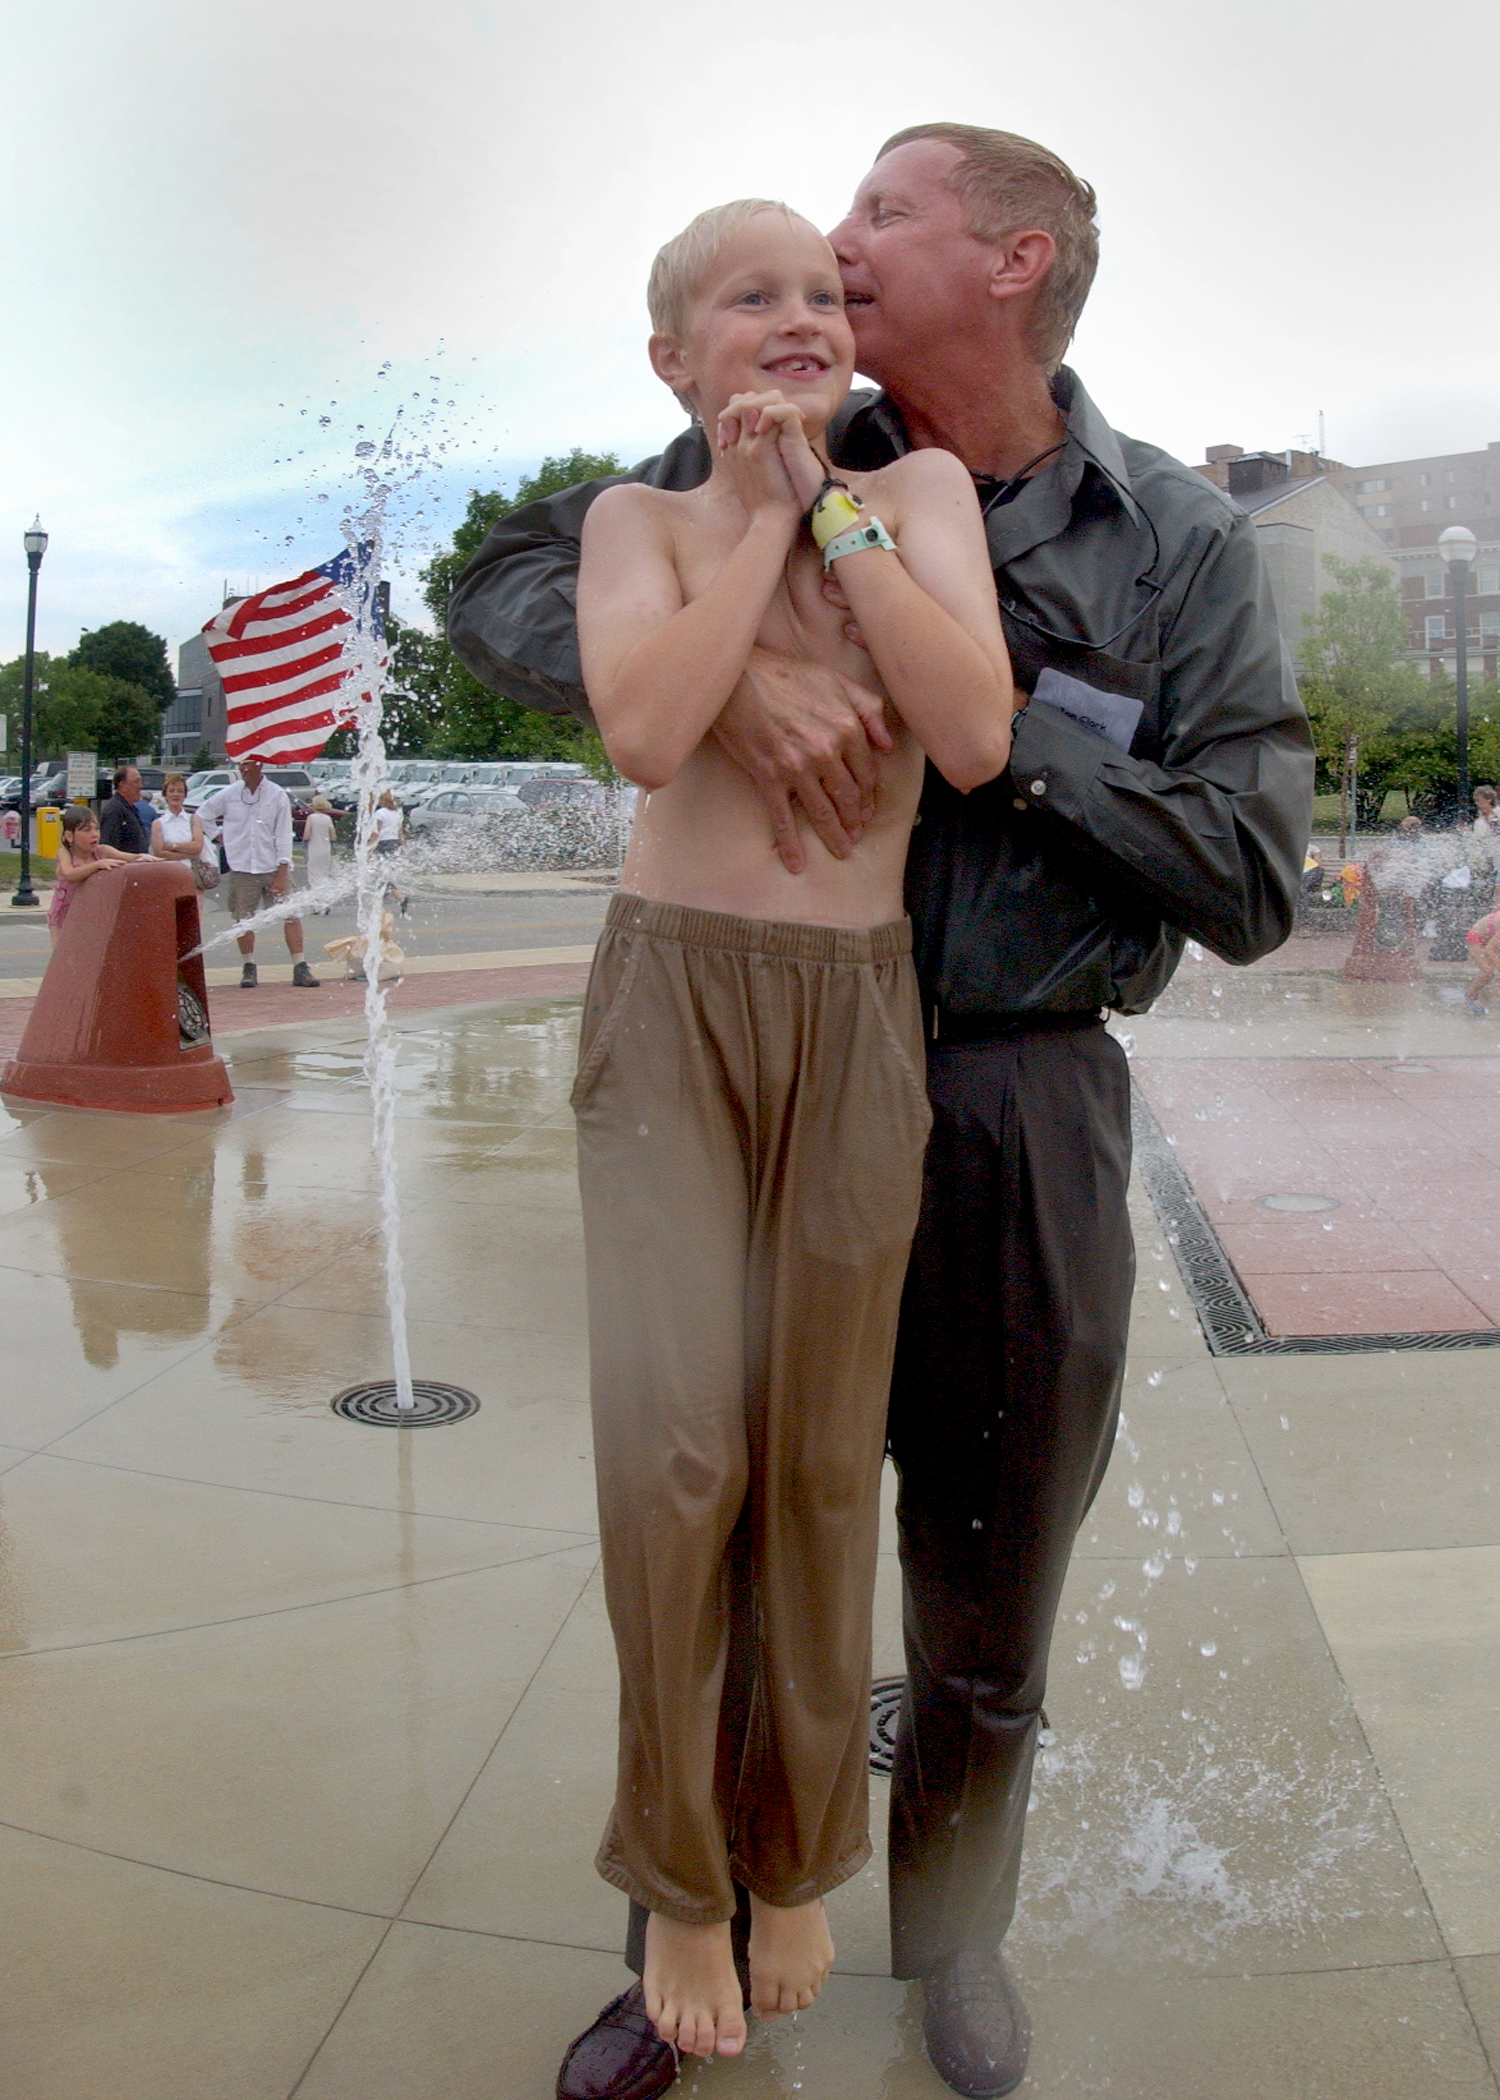 US Navy 030725-N-5576W-003 Dr. Jon Clark, husband of the late Astronaut, Capt. Laura Clark, hugs his son in the middle of the dancing waters fountain, downtown Racine, located on the shore of Lake Michigan